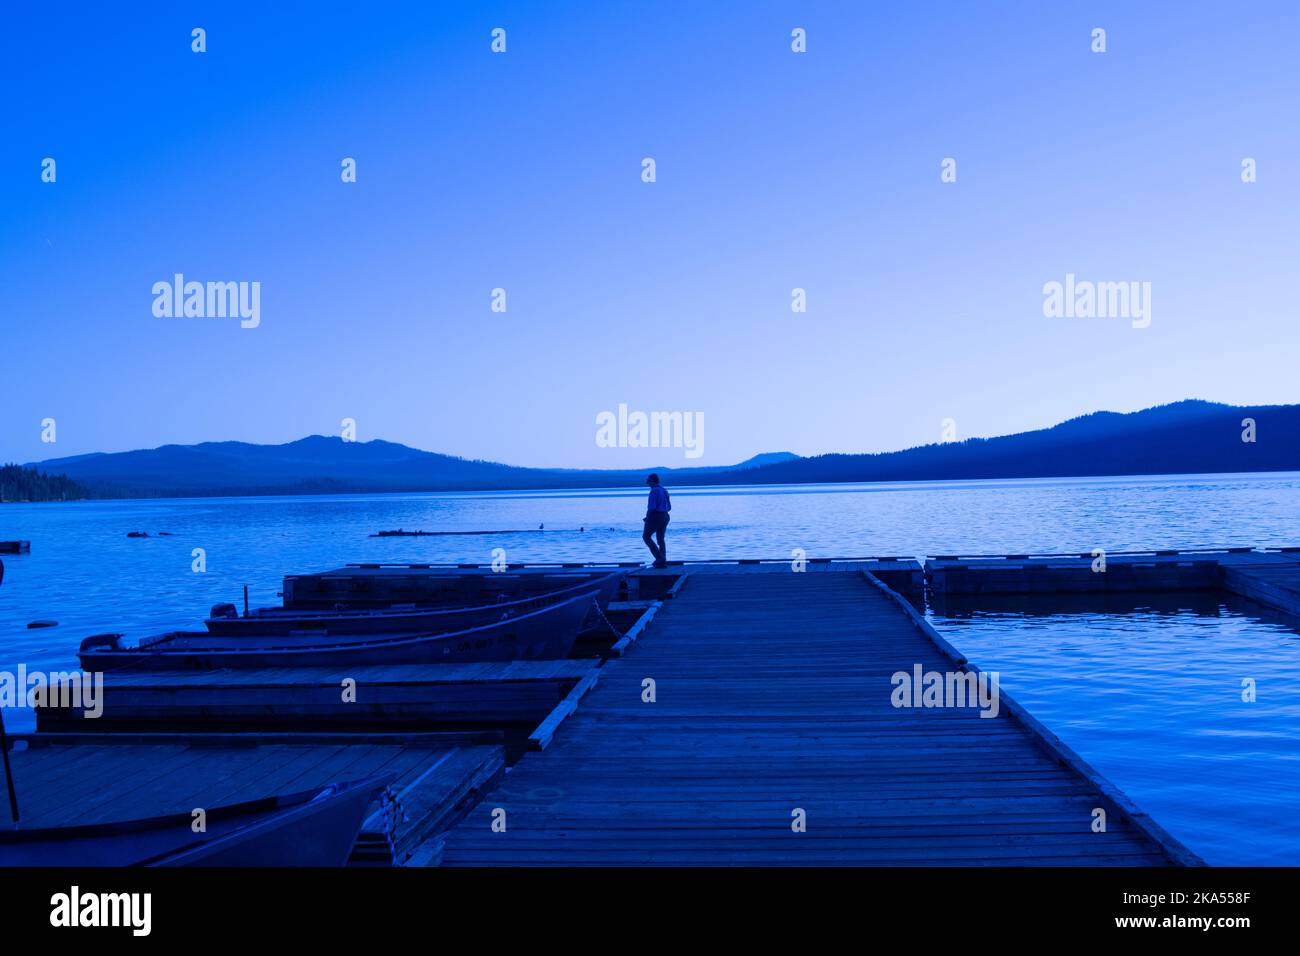 A lone person standing on a wooden boat pier, with landscape in blue light. Stock Photo